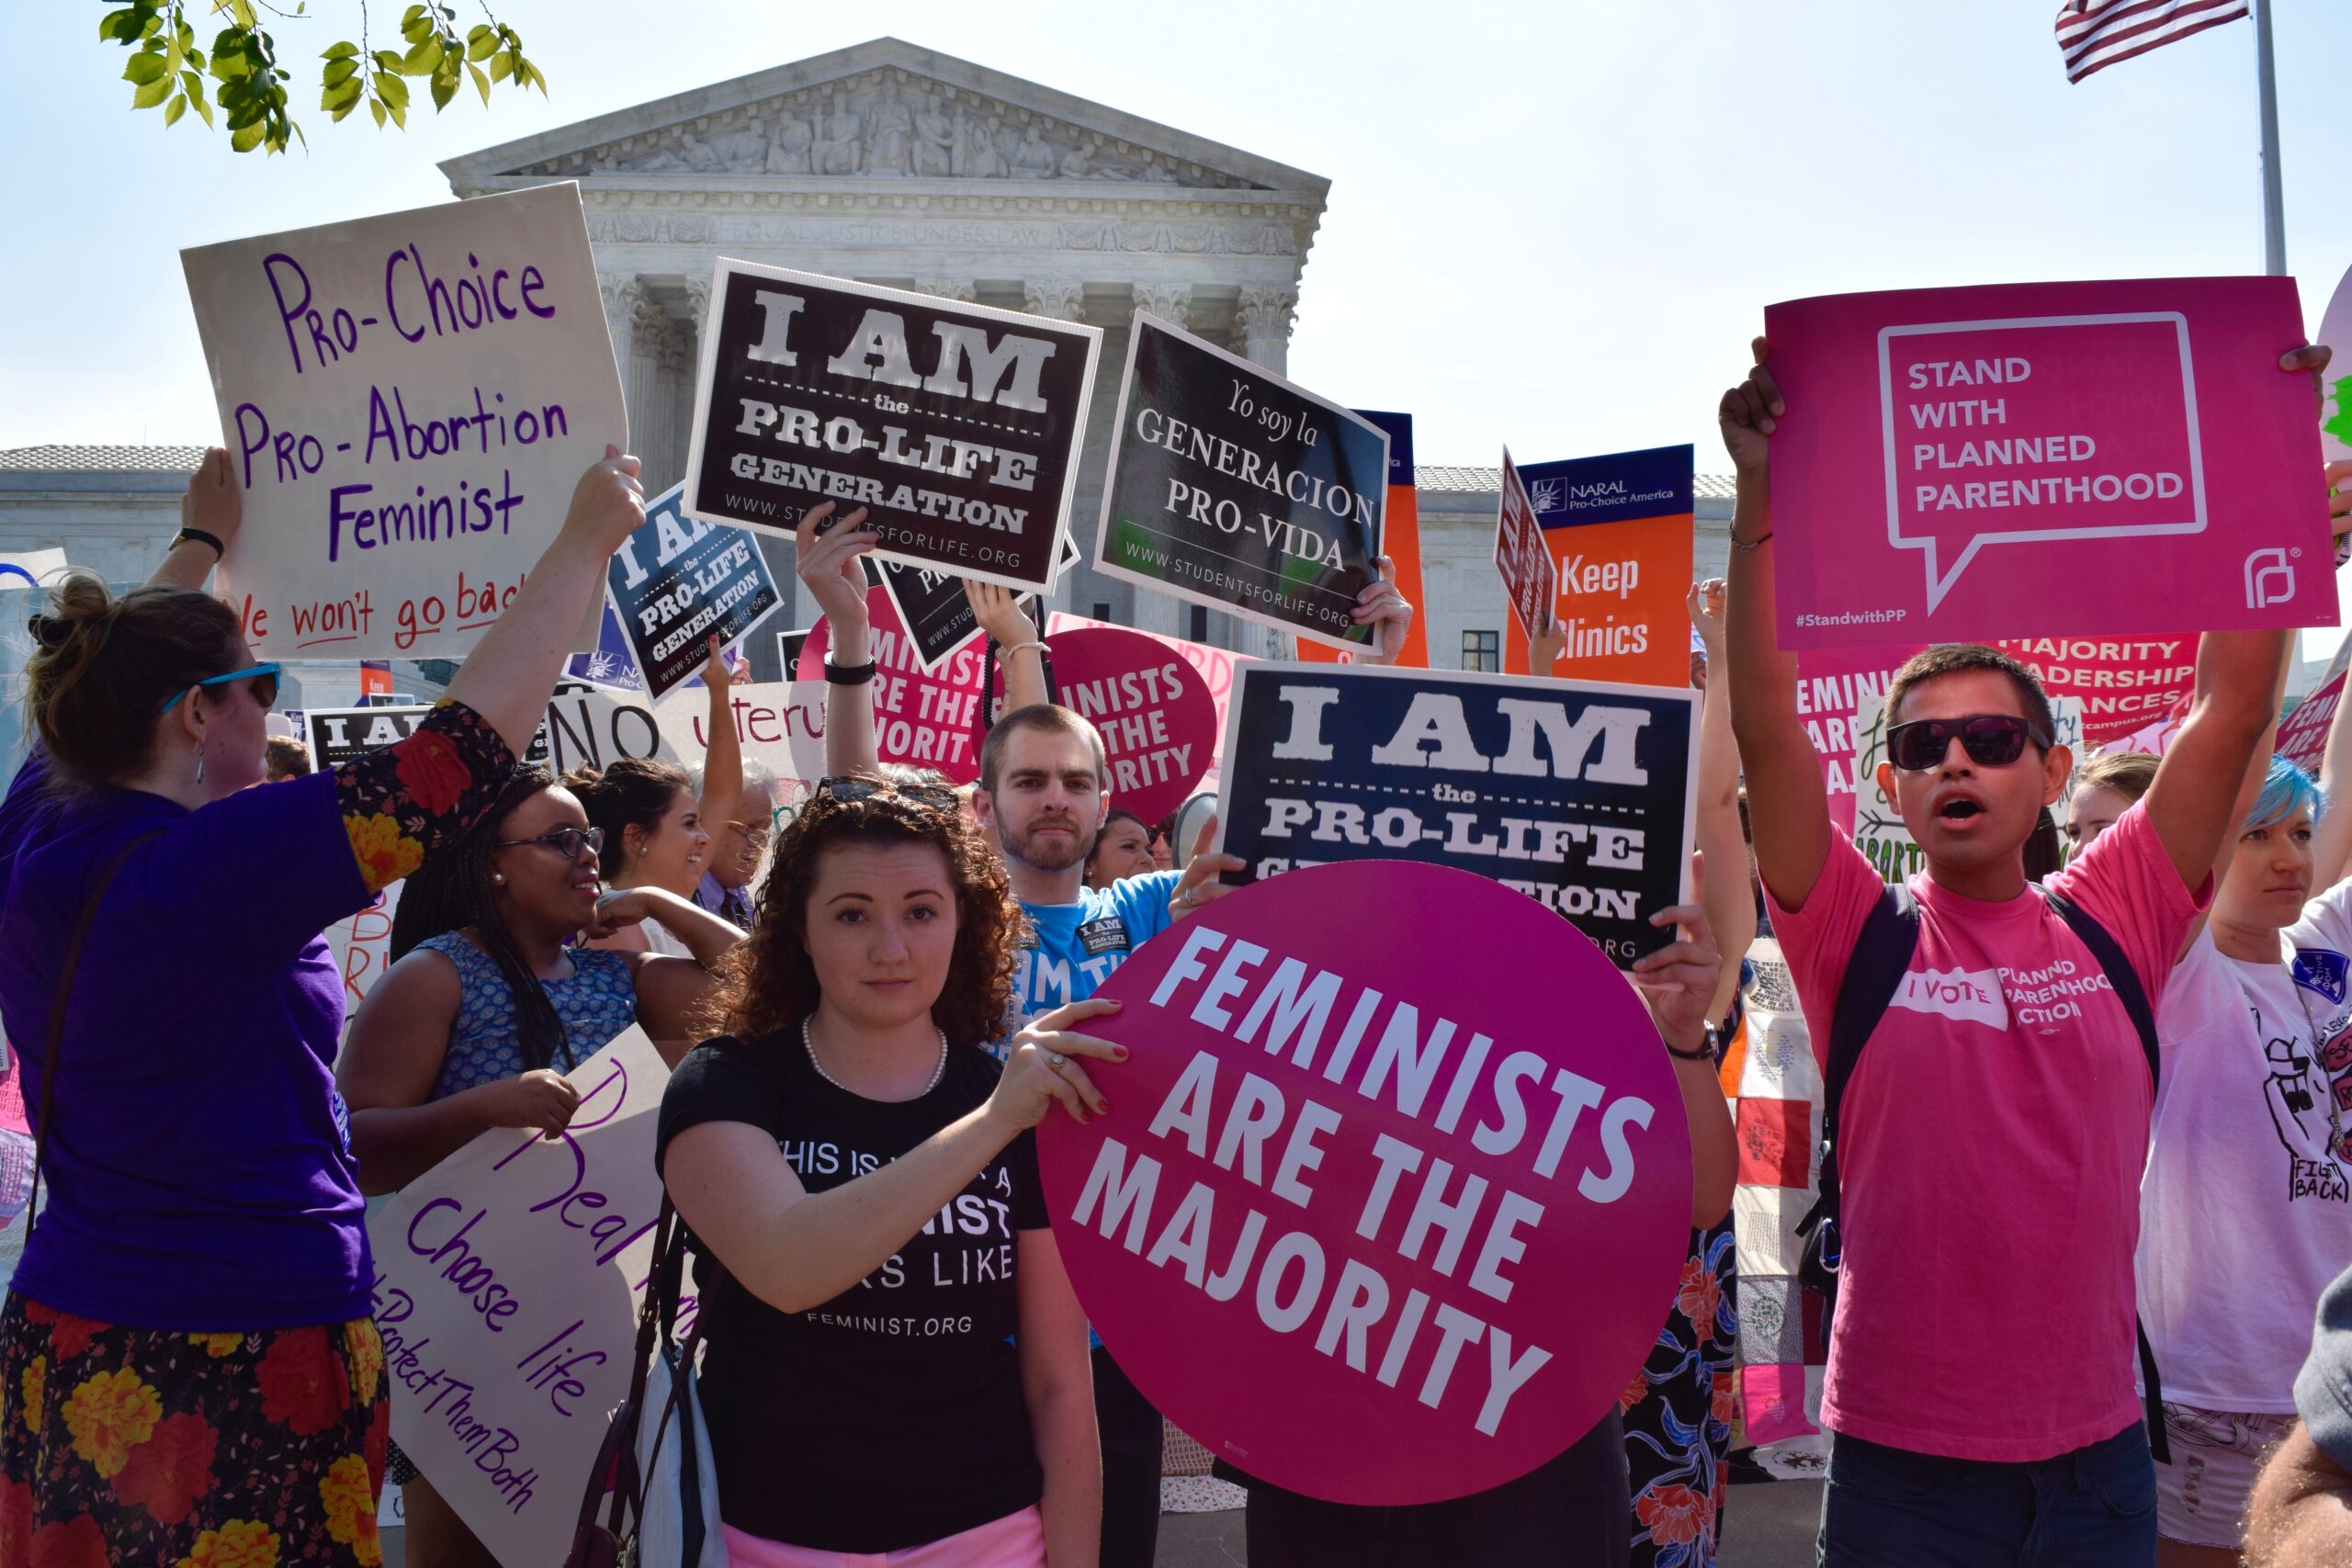 A photo showing a protest outside of the Supreme Court regarding abortion rights.